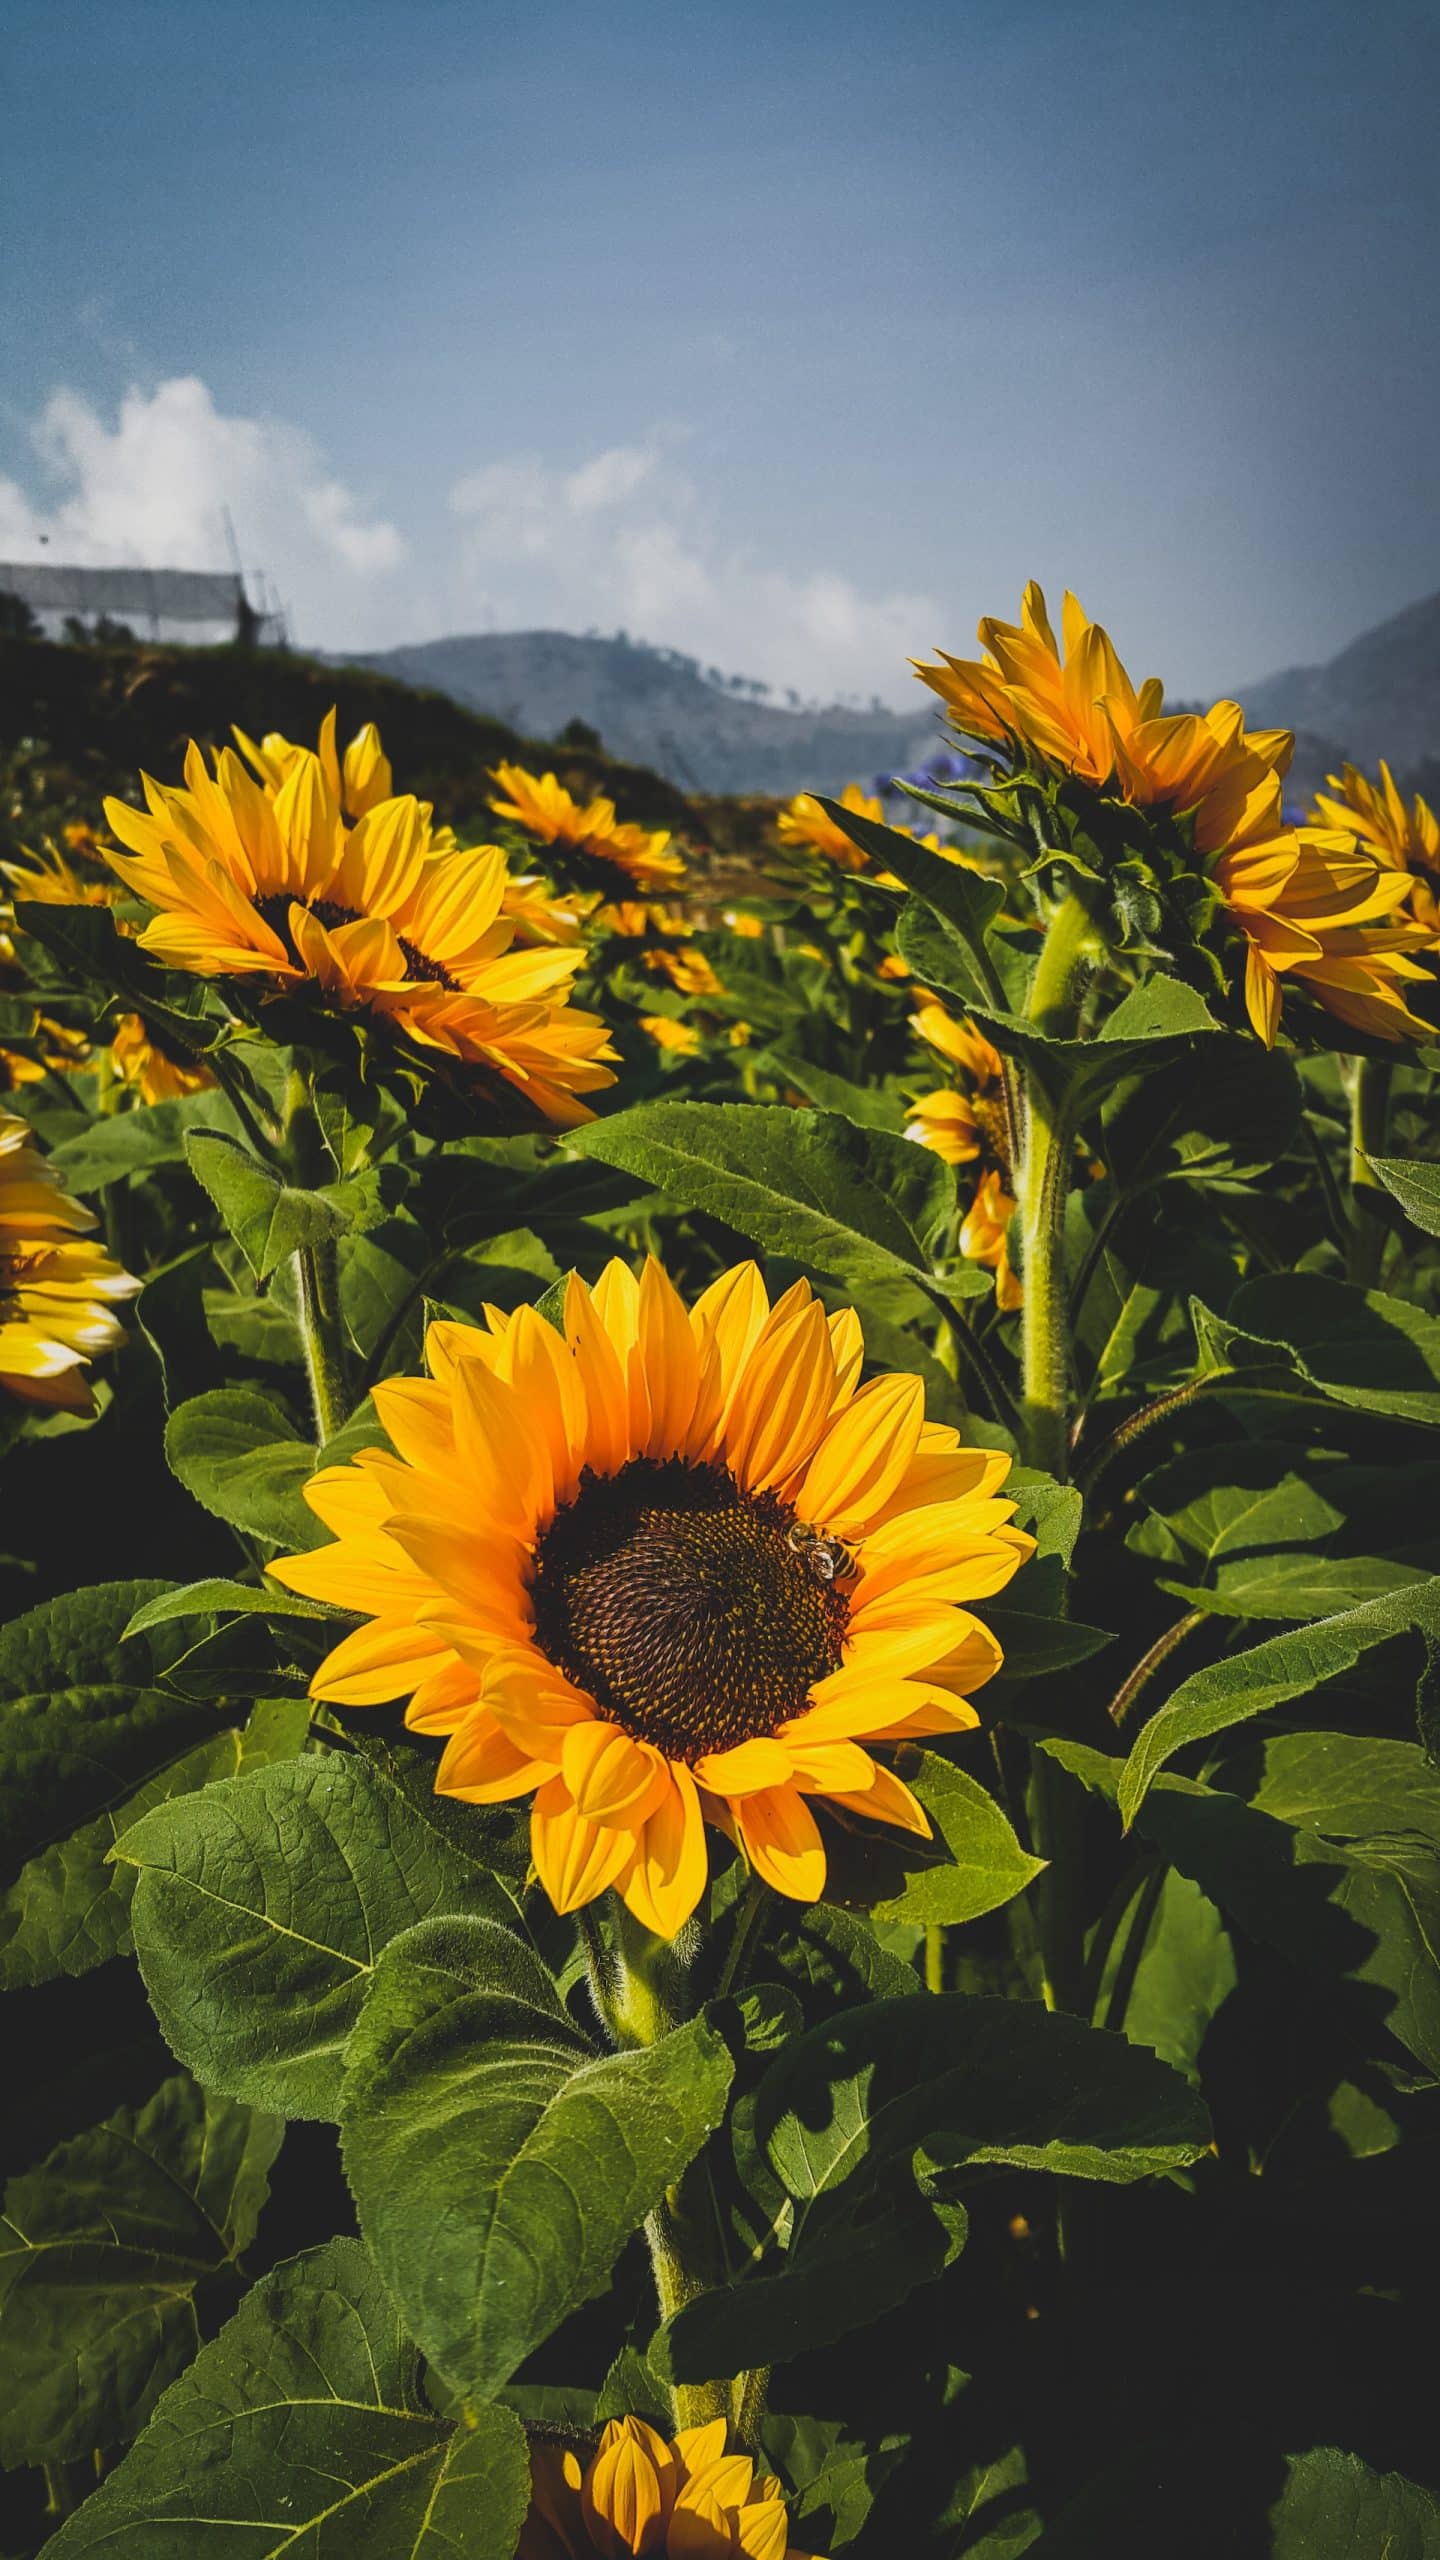 vertical photo of sunflowers in a field on a stormy-looking day, with mountains in the background